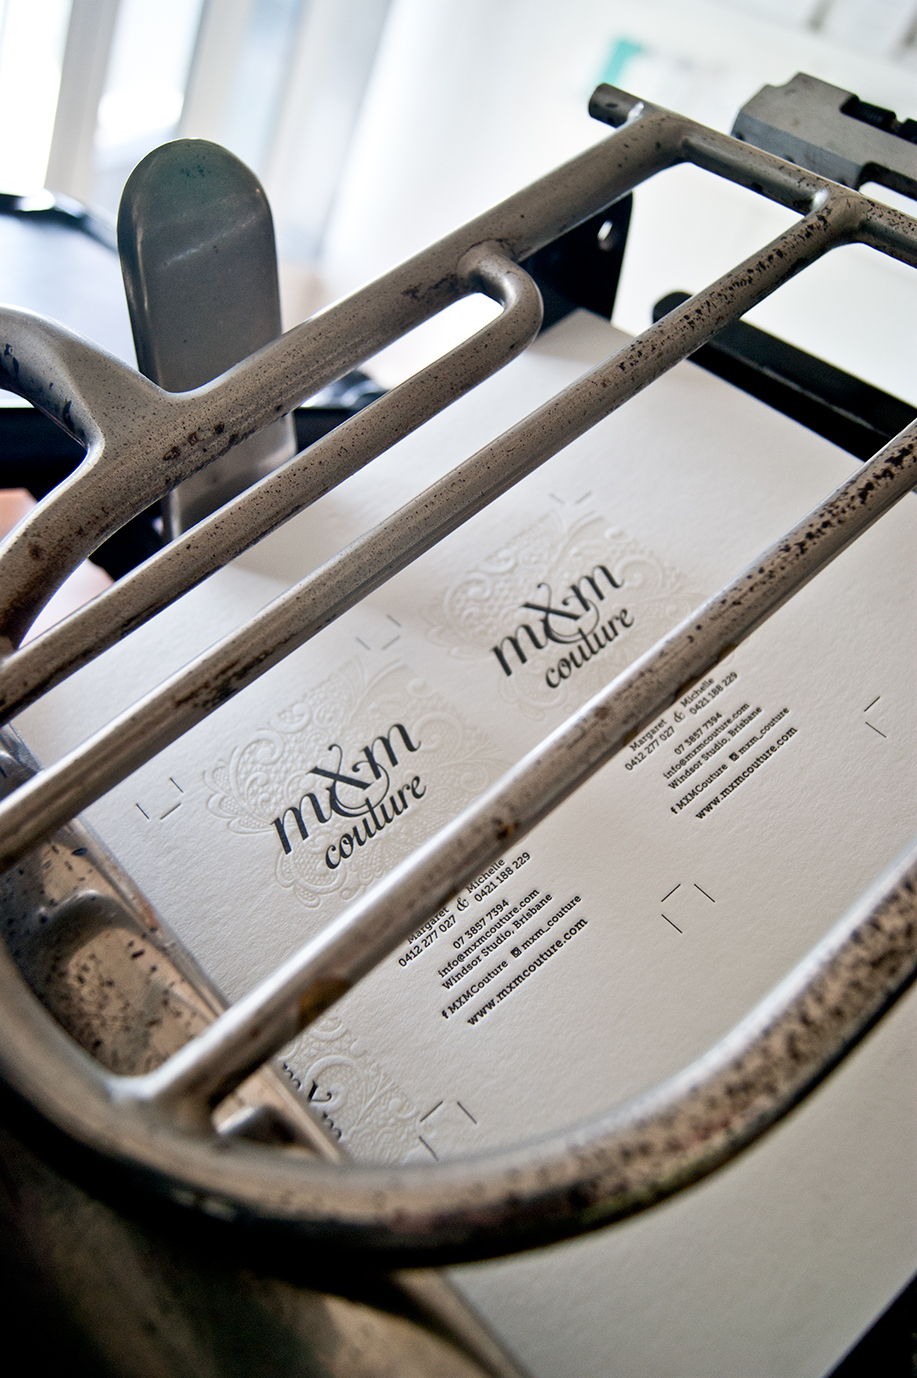 Creative Emporium designed MXM Couture business cards on printing press with new branding in Yesterday Creative Letterpress Studio